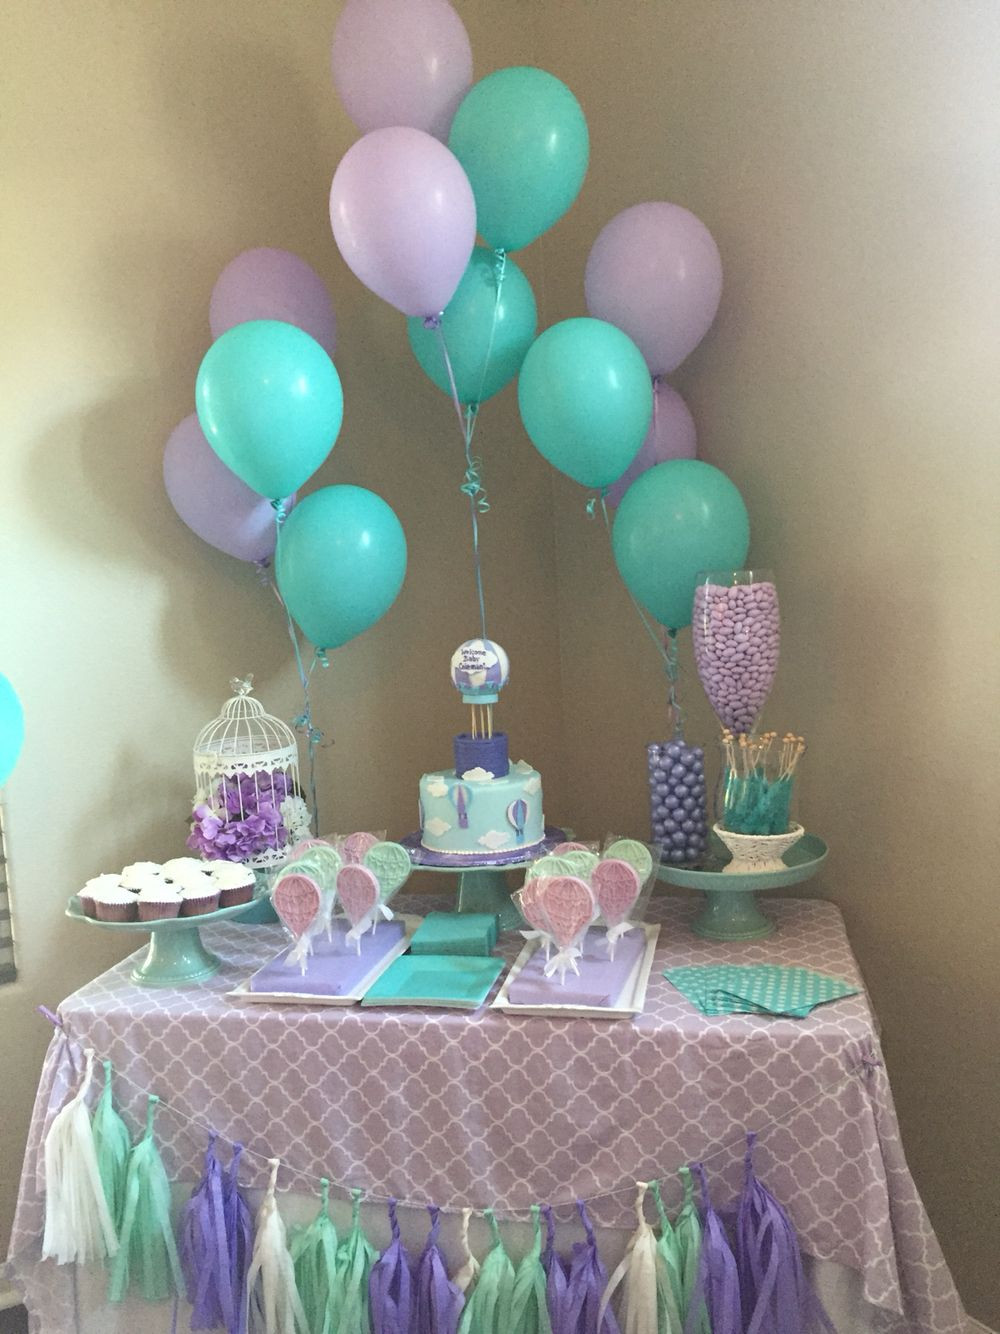 Purple Baby Shower Decor
 Mint and lavender baby shower Baby shower ideas